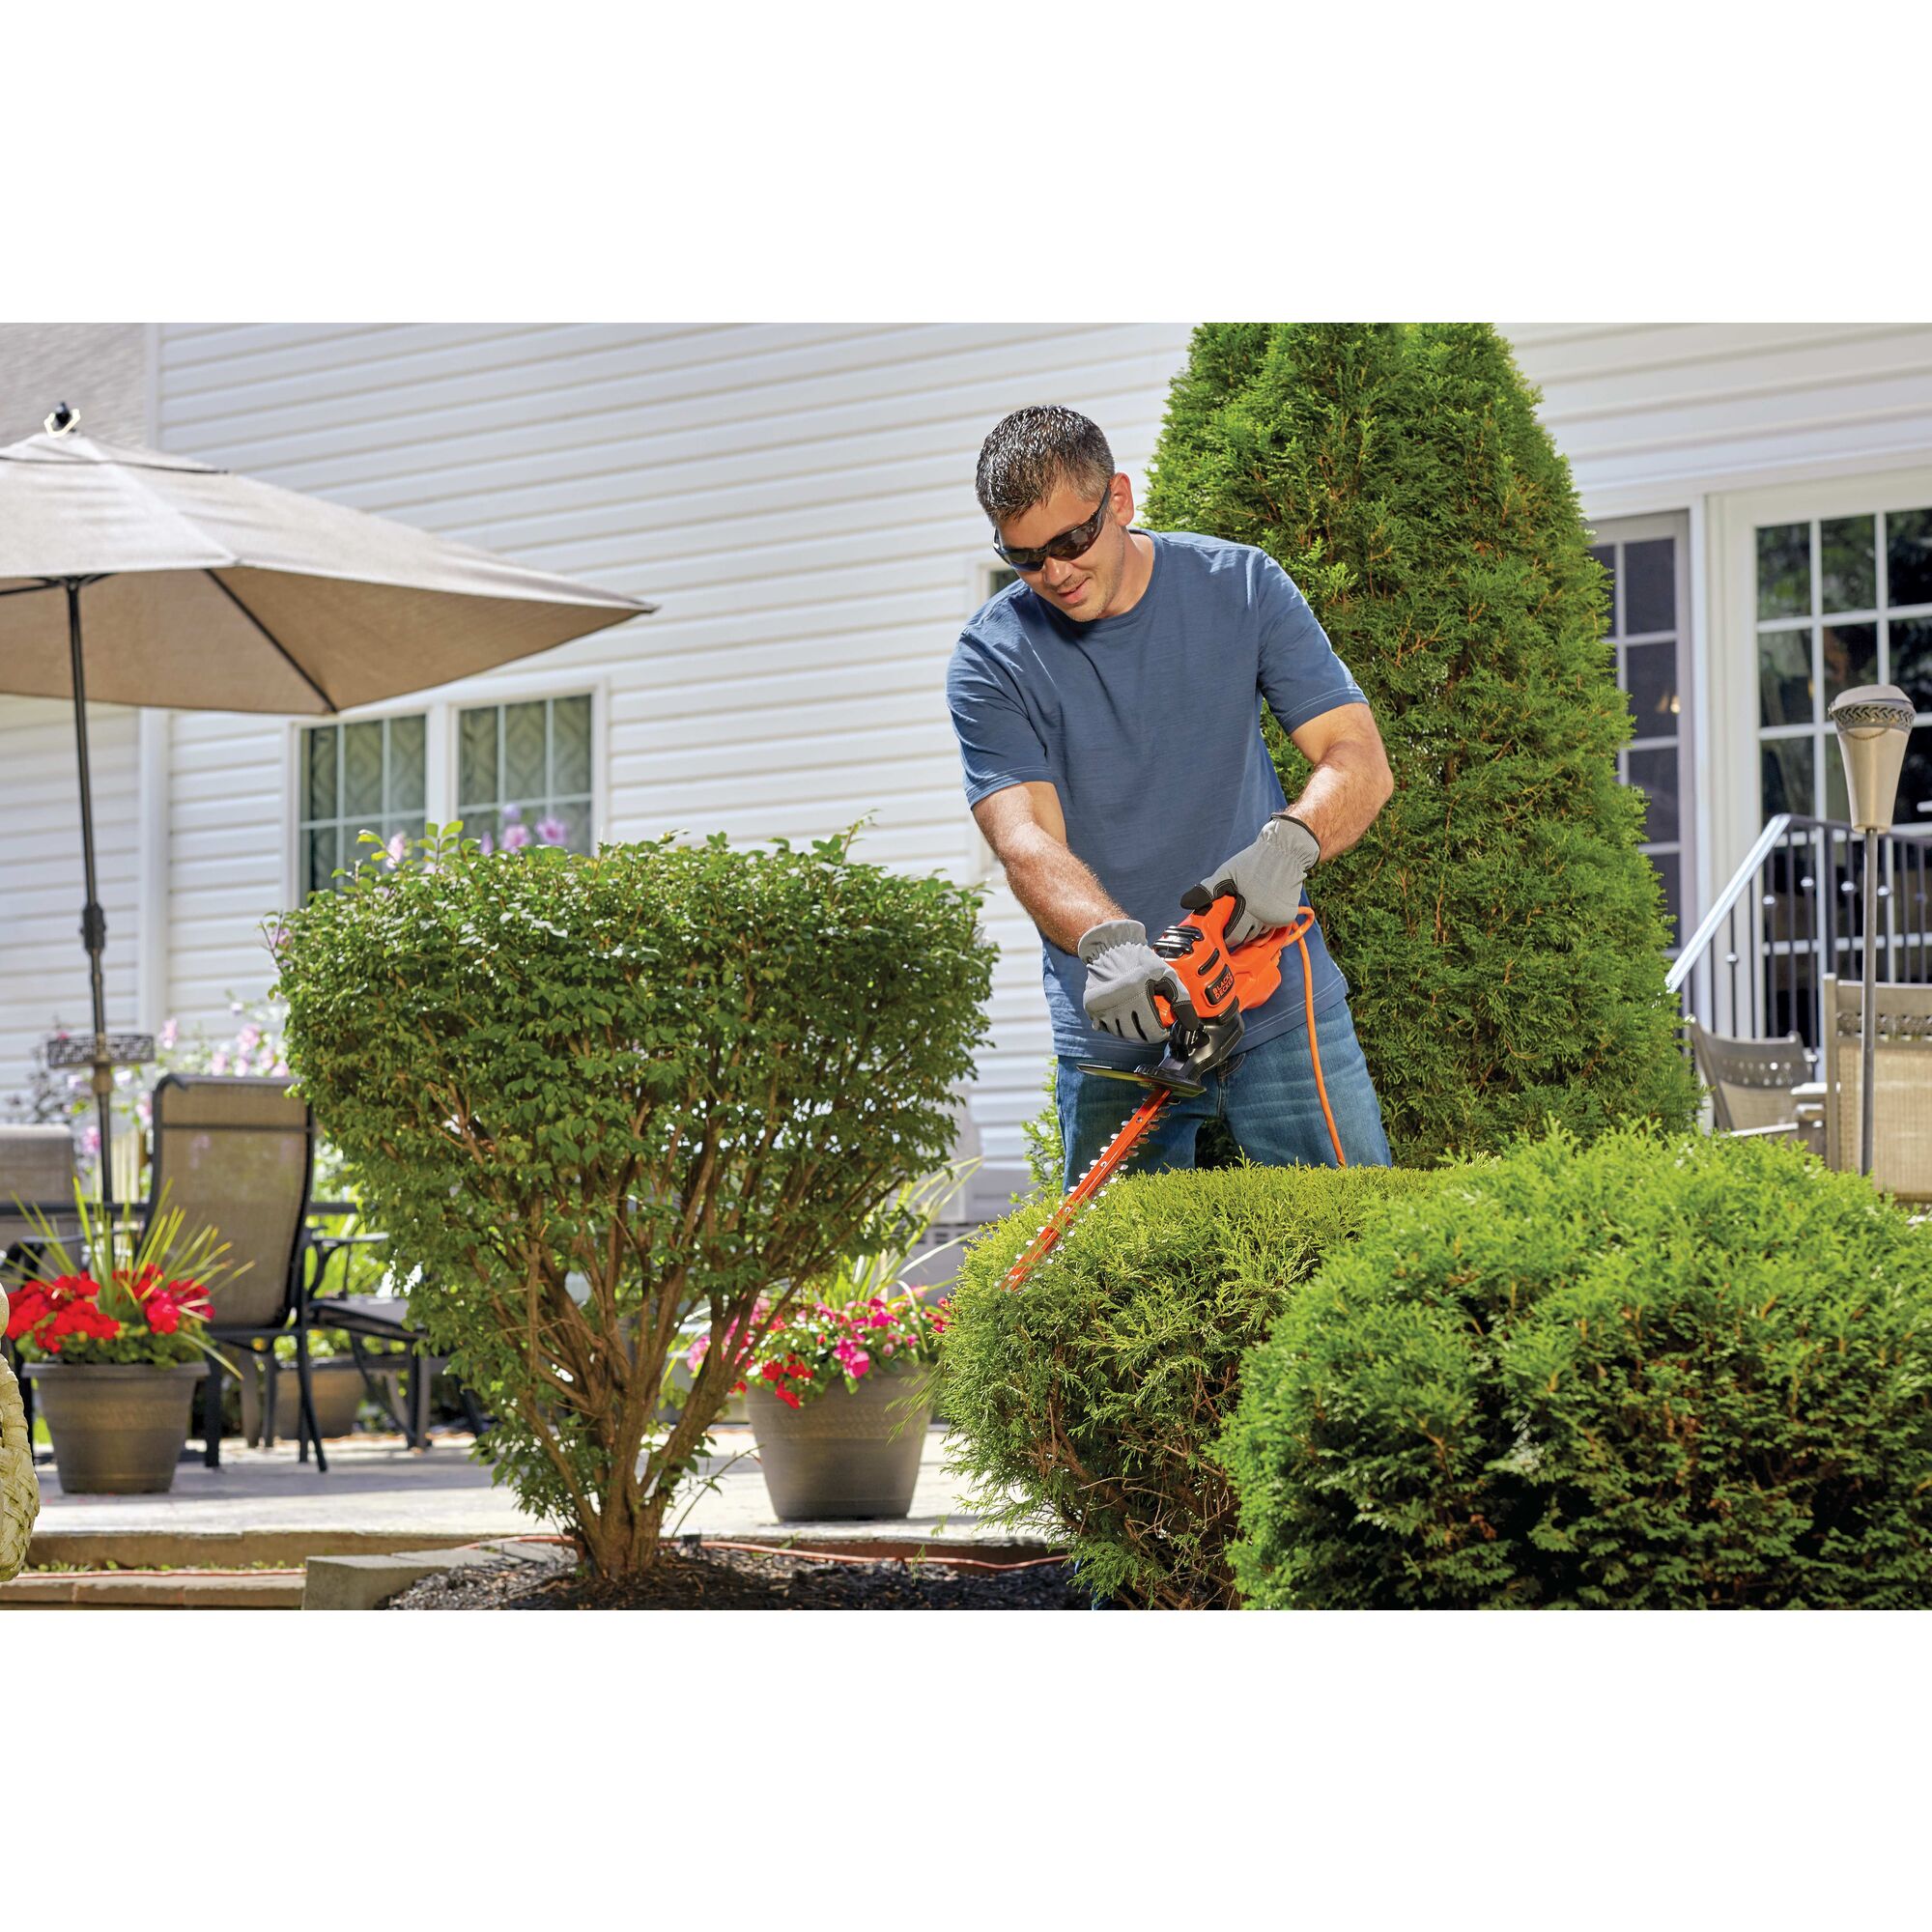 17 inch electric hedge trimmer being used to trim a hedge.